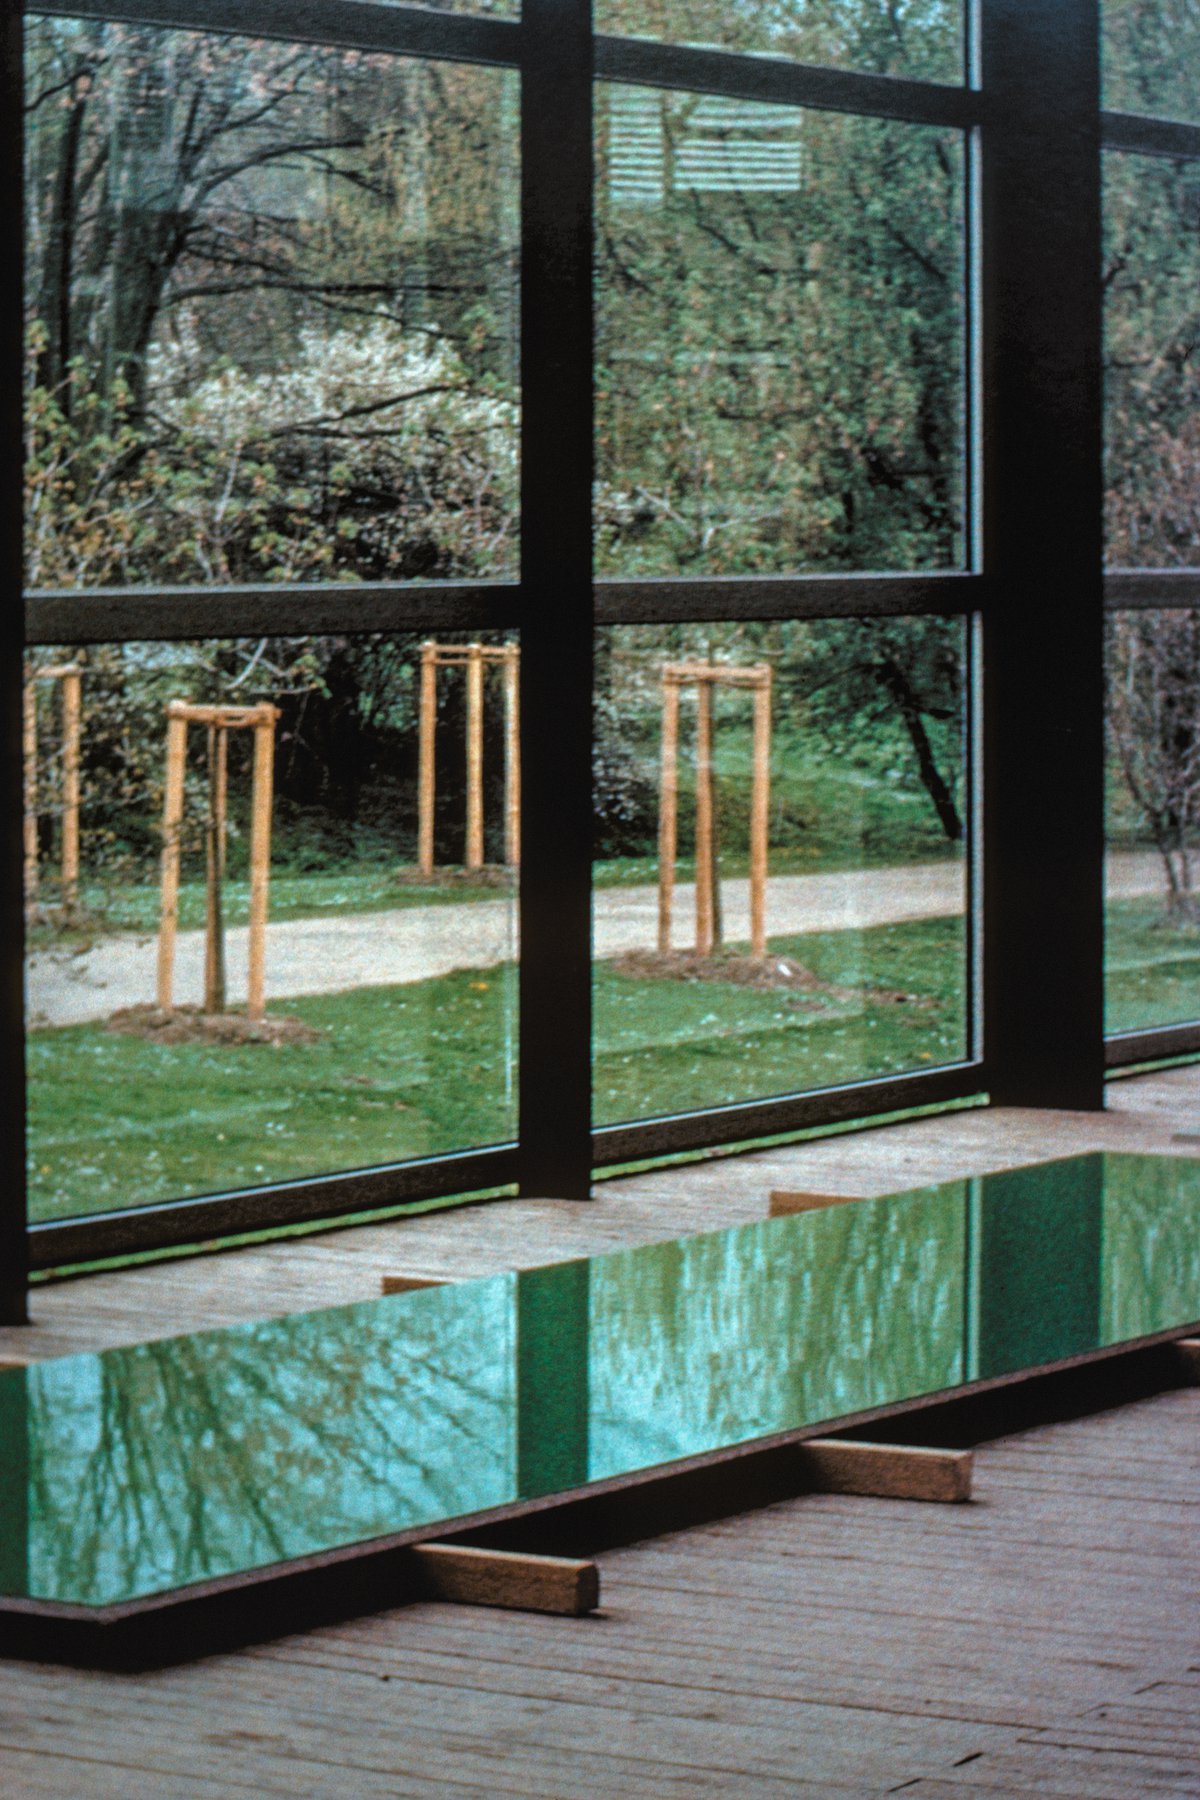 Documennta IX, 1992Installation view: Adrian Schiess, Malerei, 1992, lacquer and aluminium, dimensions vary with installationAue Pavilions in Karlsaue, Kassel